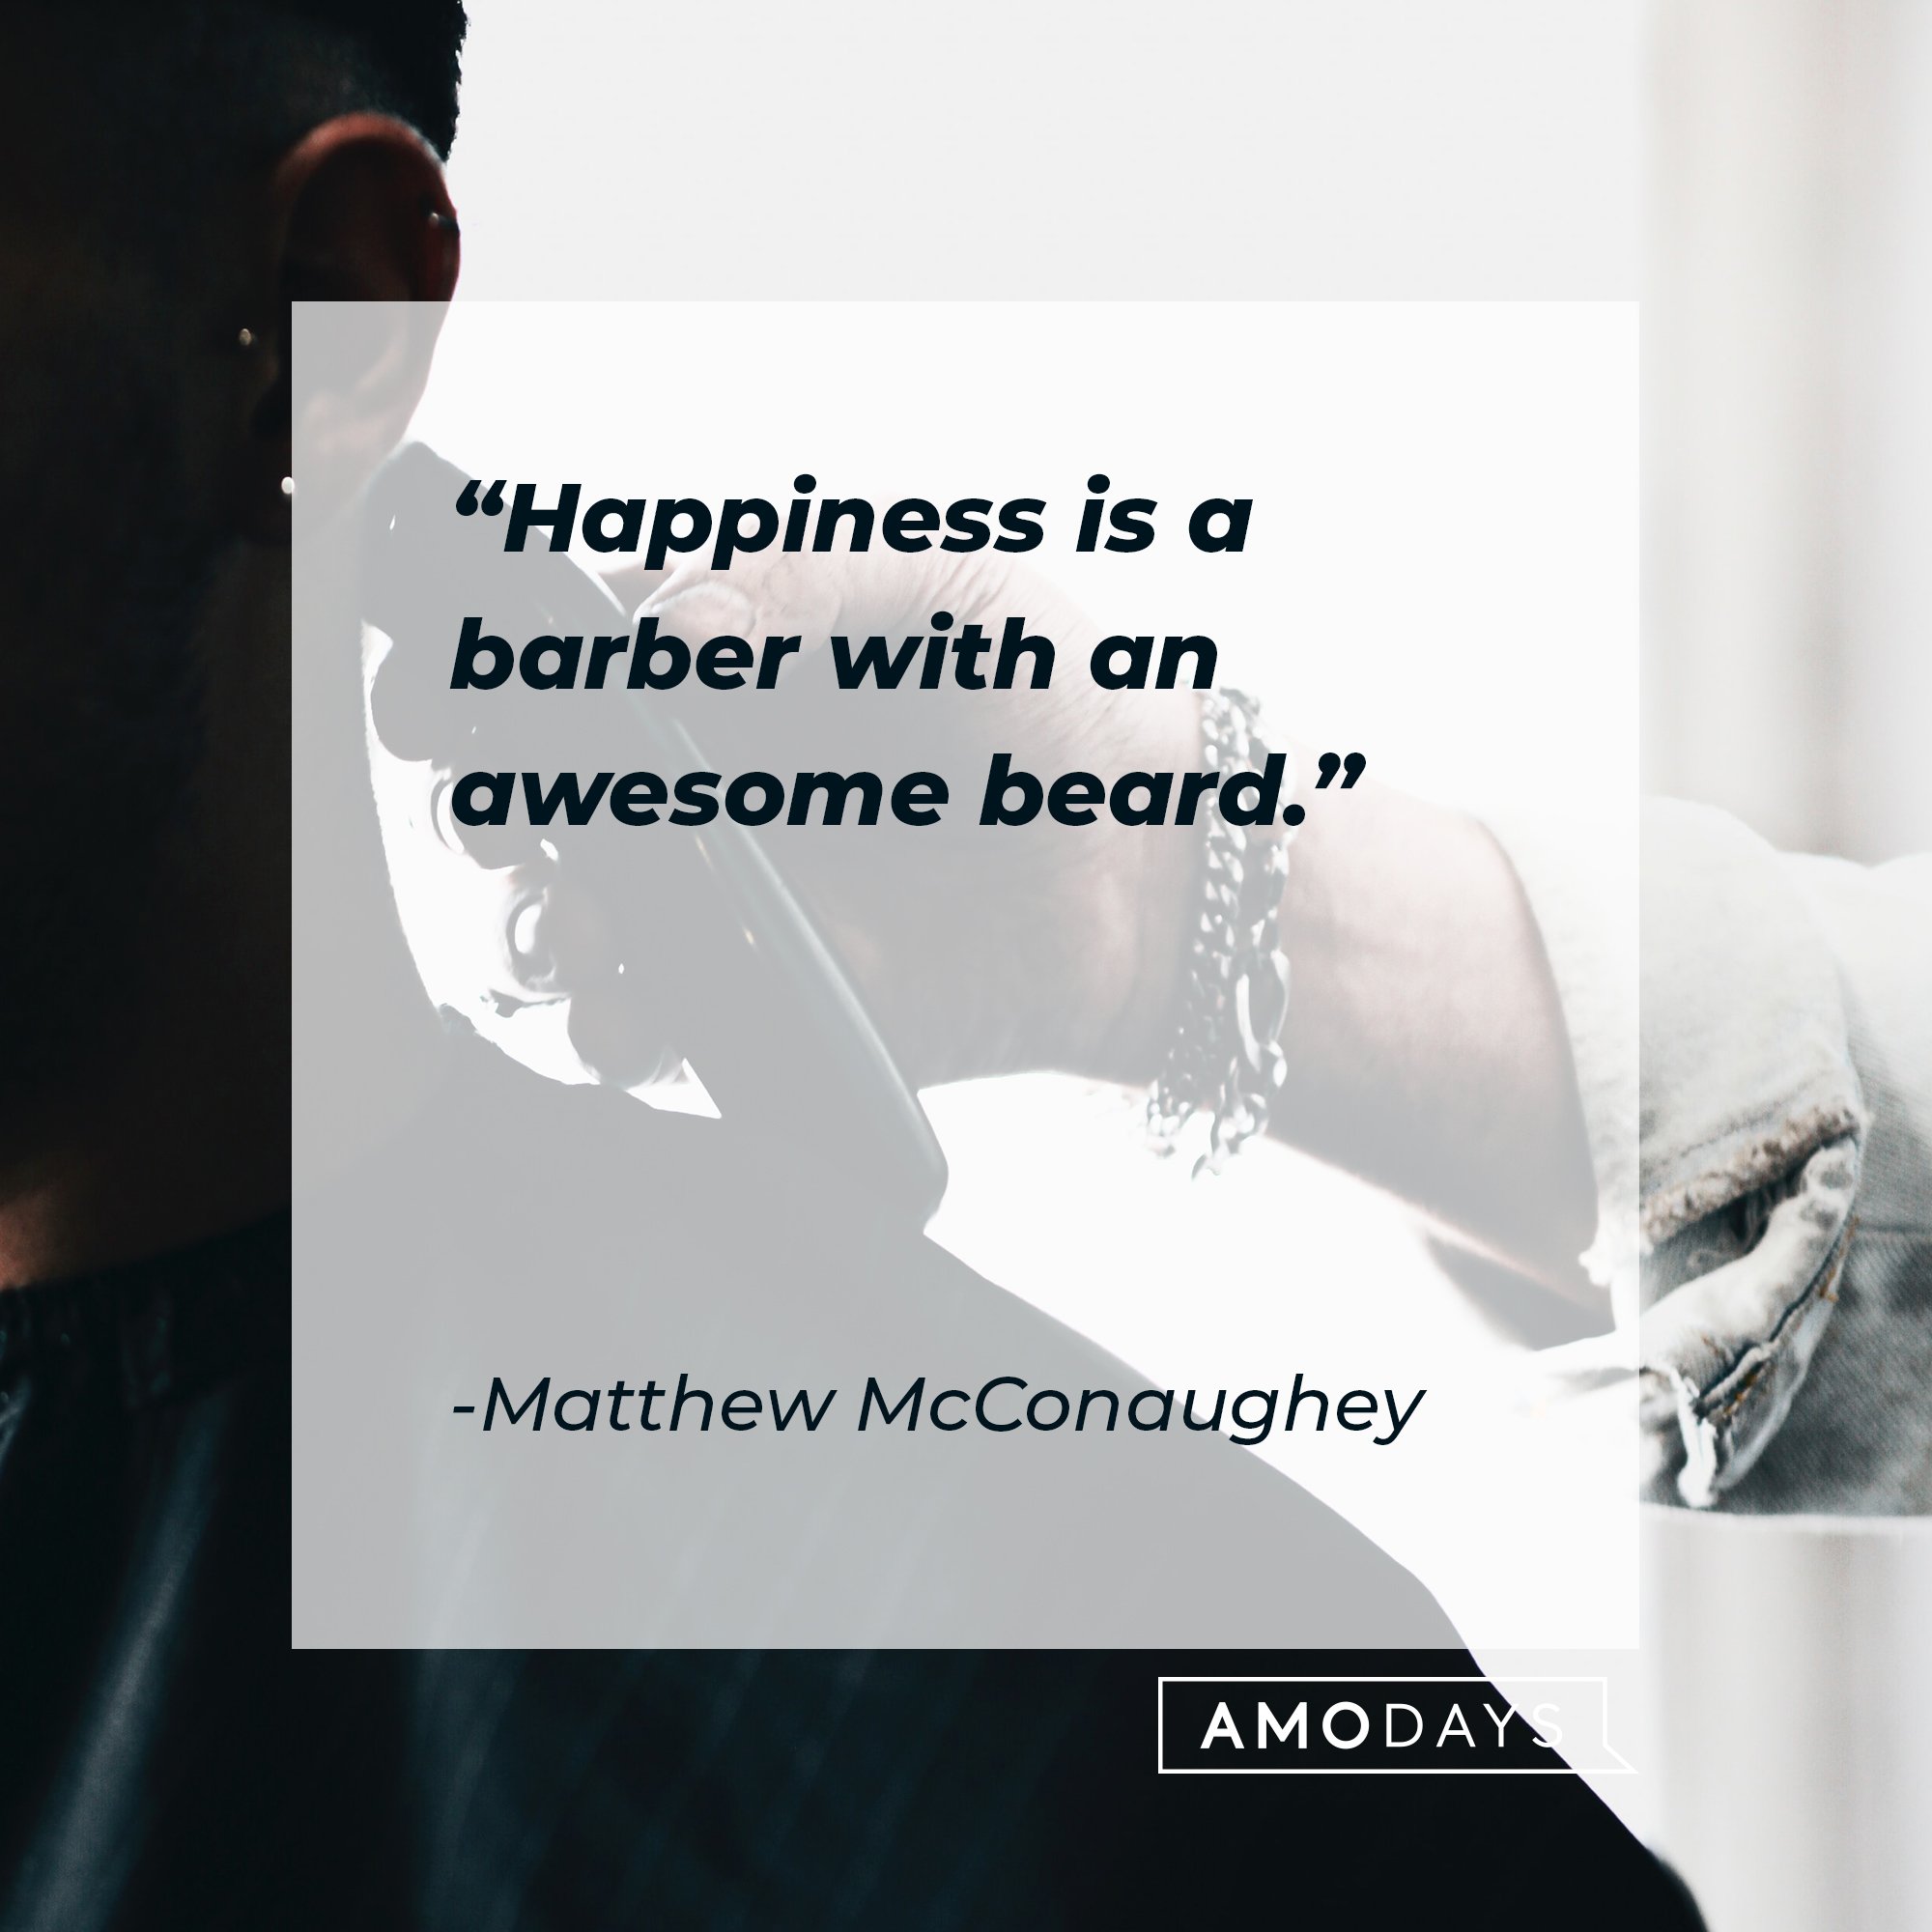 Matthew McConaughey's quote: "Happiness is a barber with an awesome beard." | Image: AmoDays